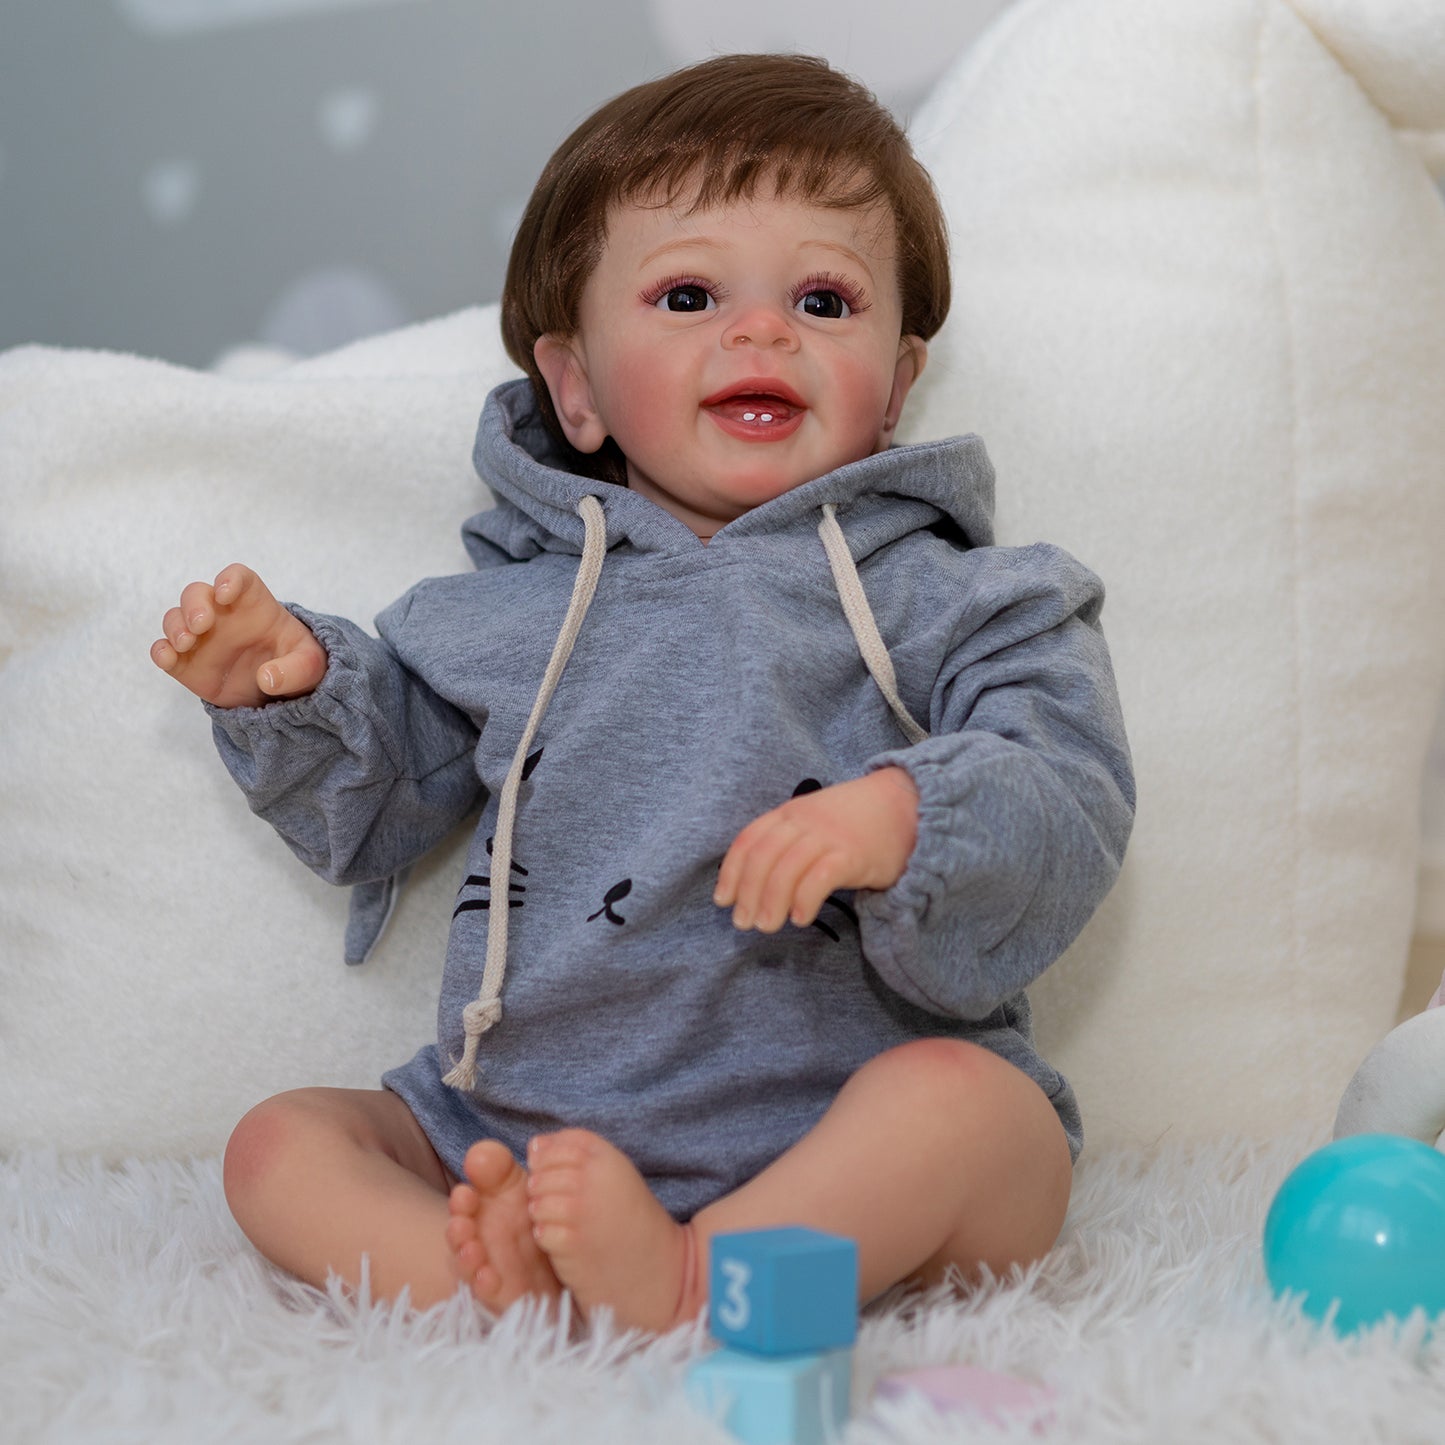 Lifelike baby dolls | reborn baby dolls | Realistic baby dolls| newborn baby dolls | real life baby dolls | rebron baby dolls toddler | lifelike toddler dolls | therapy dolls for adults | anatomically correct baby girl doll | infant baby doll | gift for kids ages 3+ girl | dementia patients | weighted cloth body | birthday gift | collection | girl | boys |  mother | daughter | granddaughter | sleeping |real look real baby dolls that look real looking | Mothers day | reborn toddler dolls | mnmj